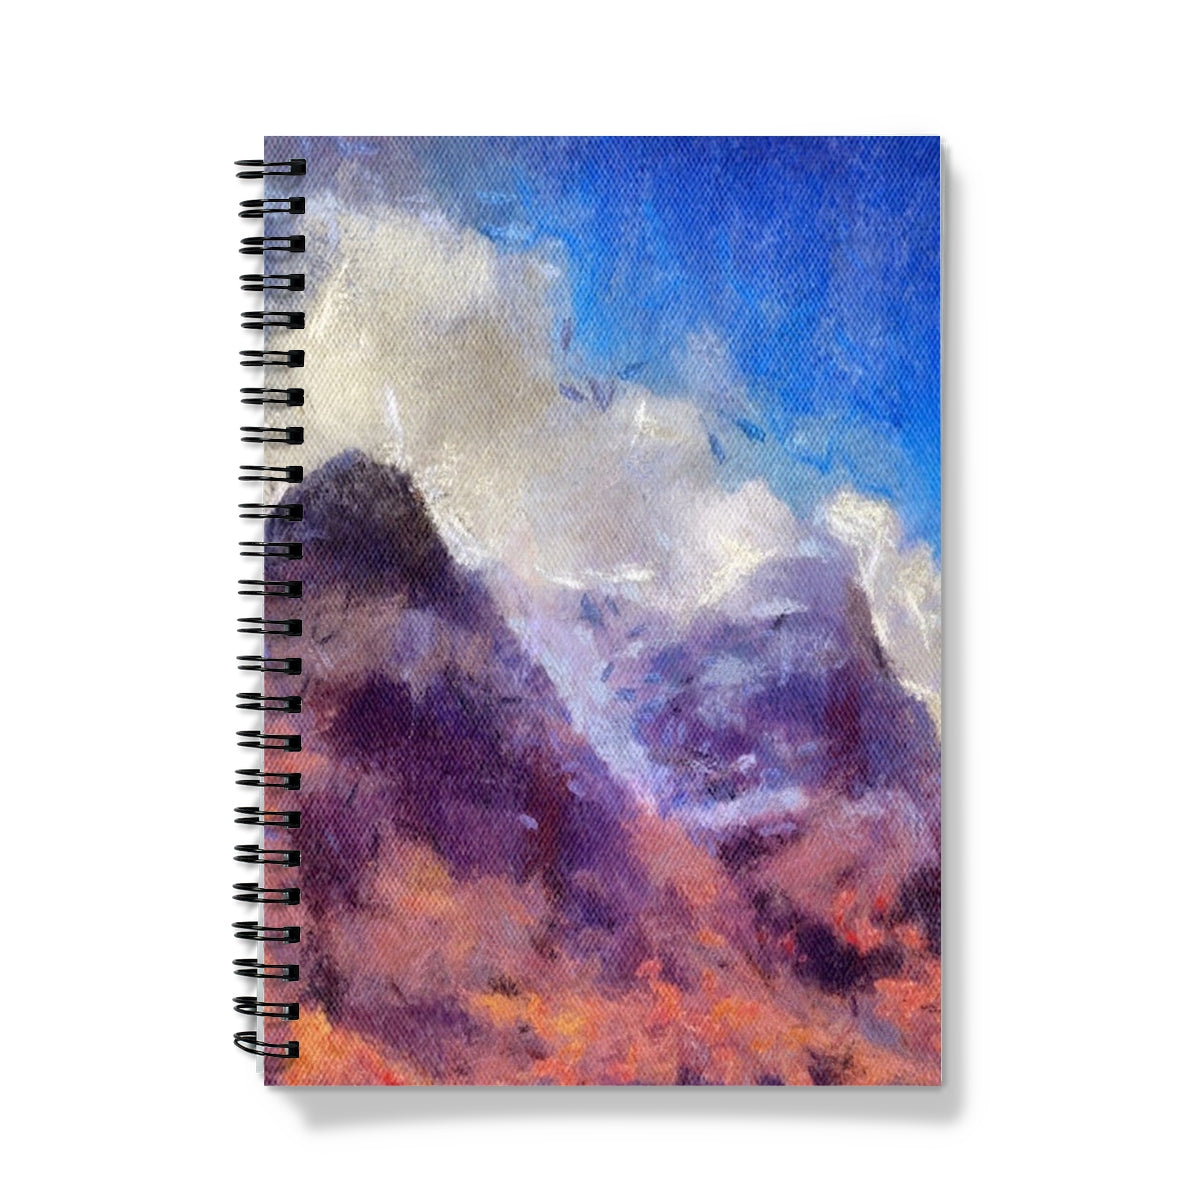 Glencoe Art Gifts Notebook-Journals & Notebooks-Glencoe Art Gallery-A5-Lined-Paintings, Prints, Homeware, Art Gifts From Scotland By Scottish Artist Kevin Hunter